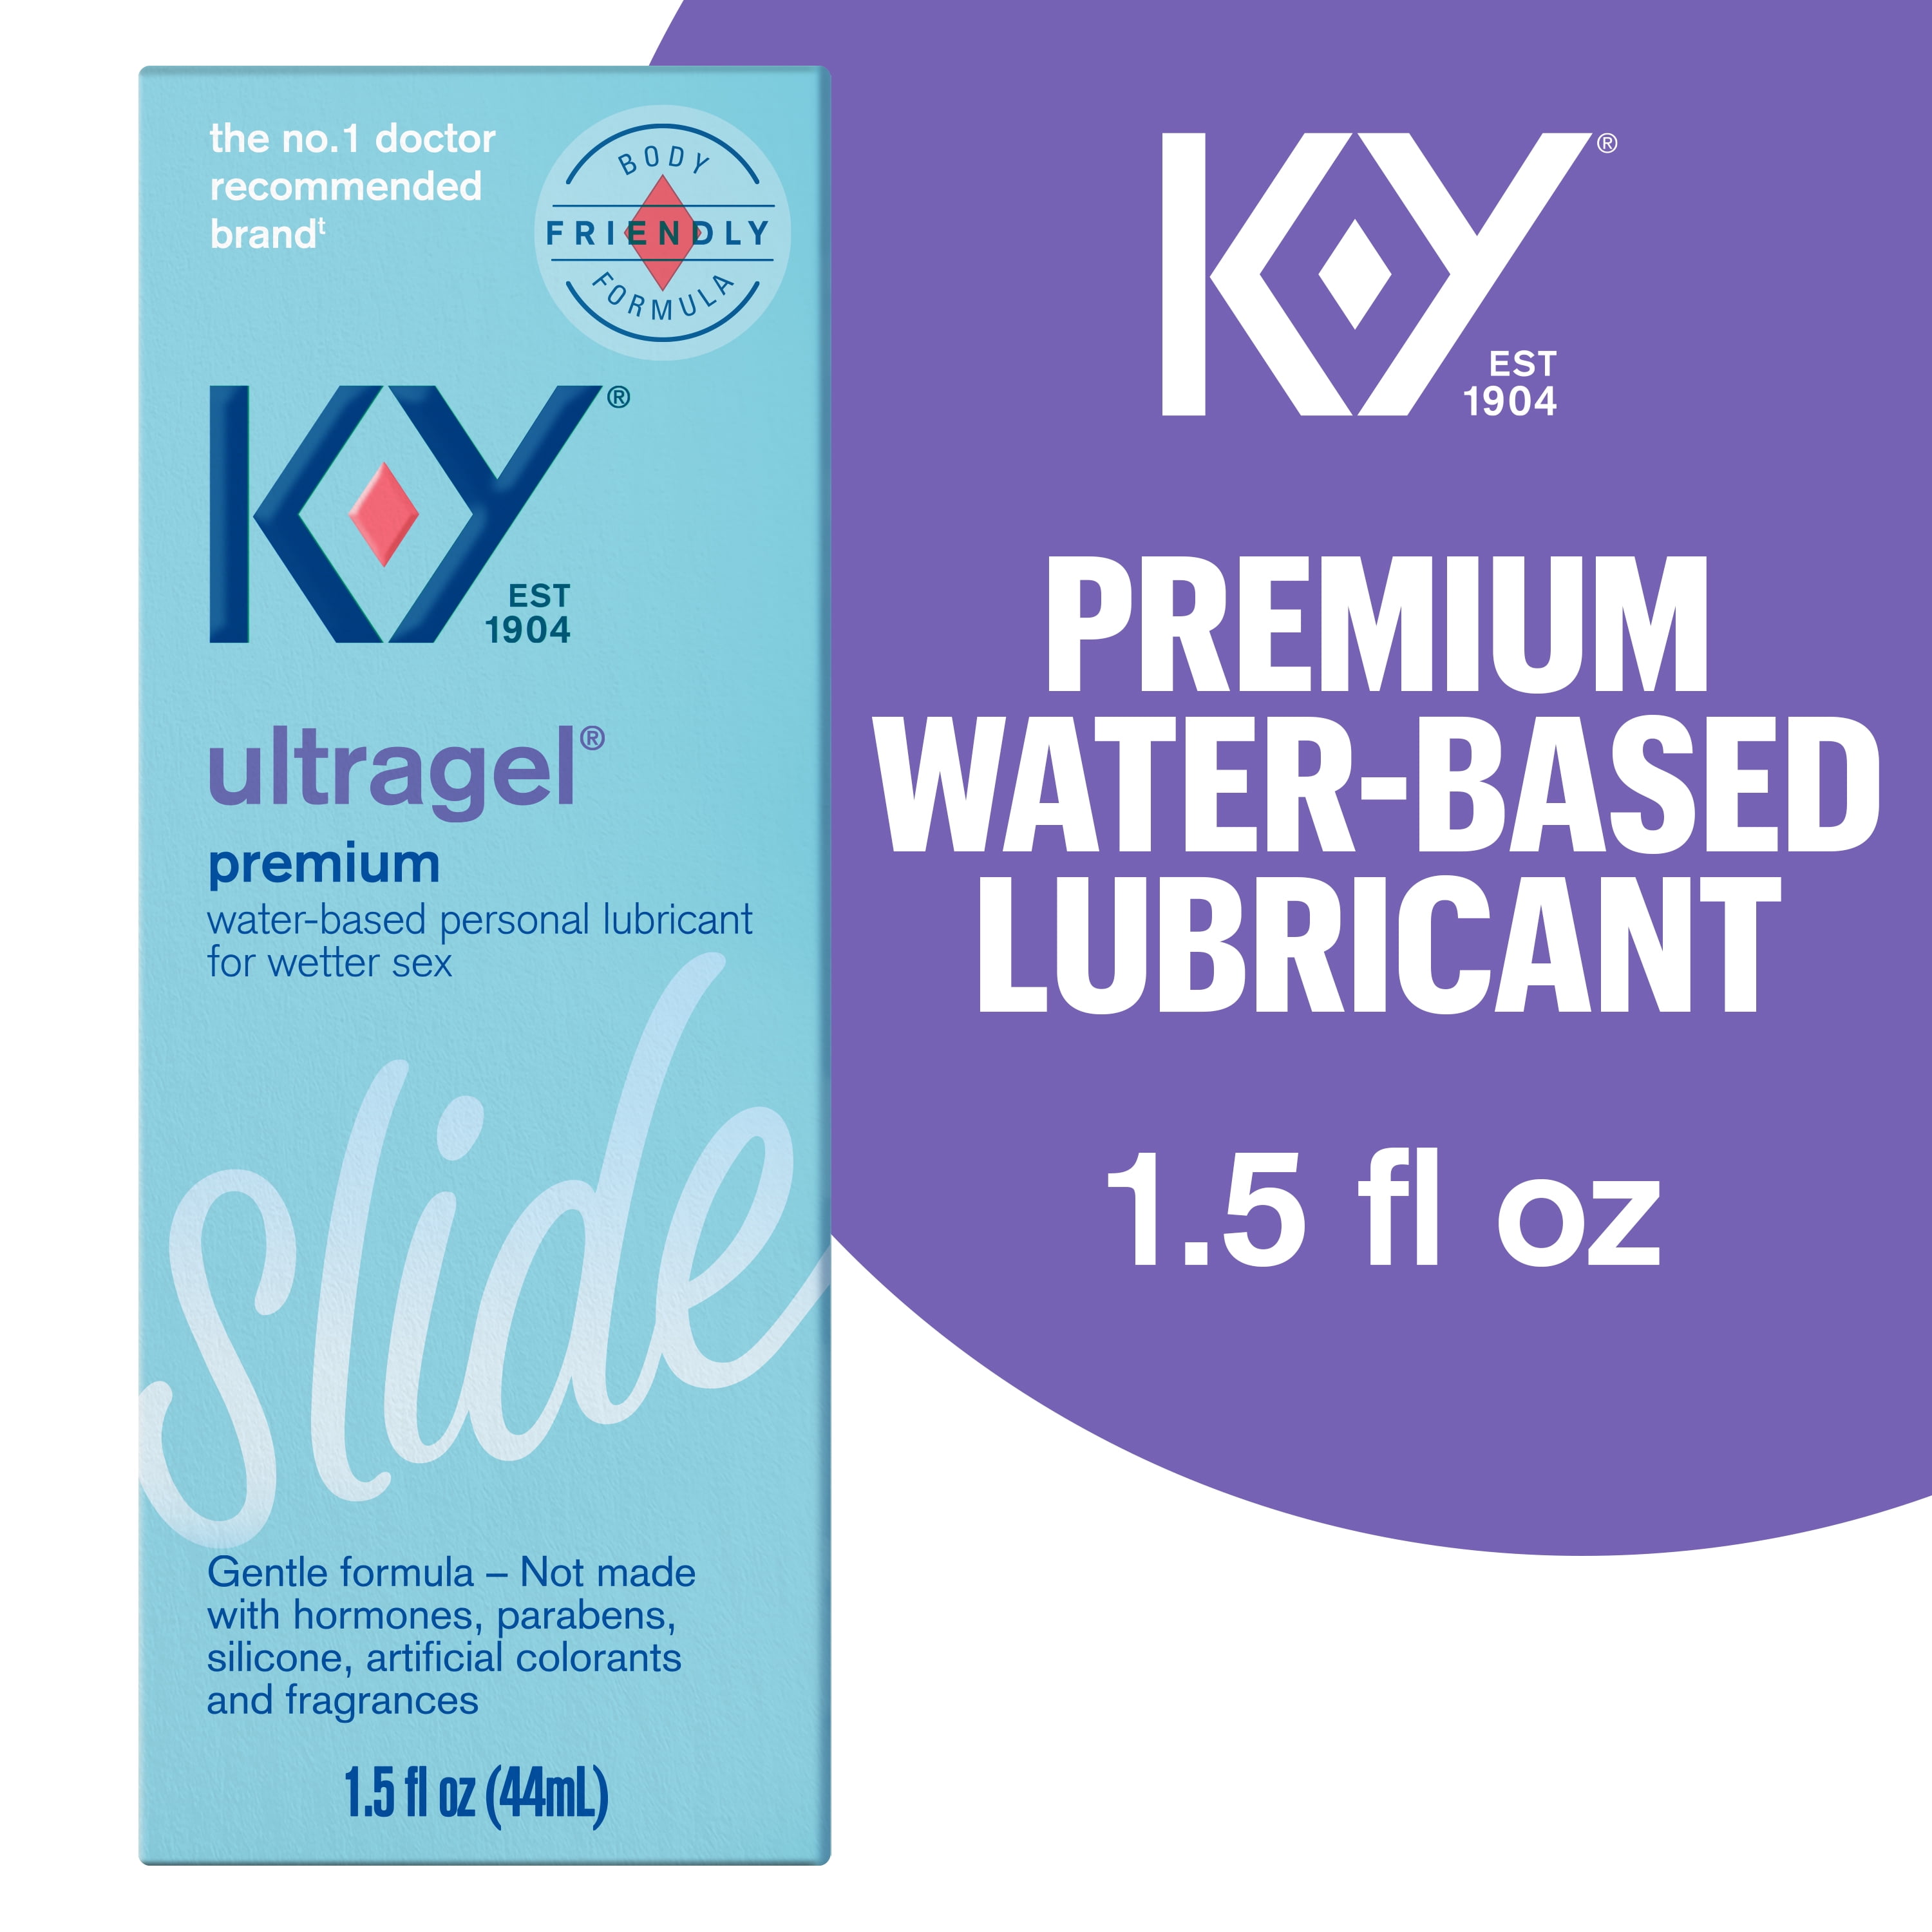 K-Y Ultragel Lube, Personal Lubricant, NEW Water-Based Formula, Safe for Anal Sex, Safe to Use with Latex Condoms, For Men, Women and Couples, Body Friendly 1.5 FL OZ pic pic